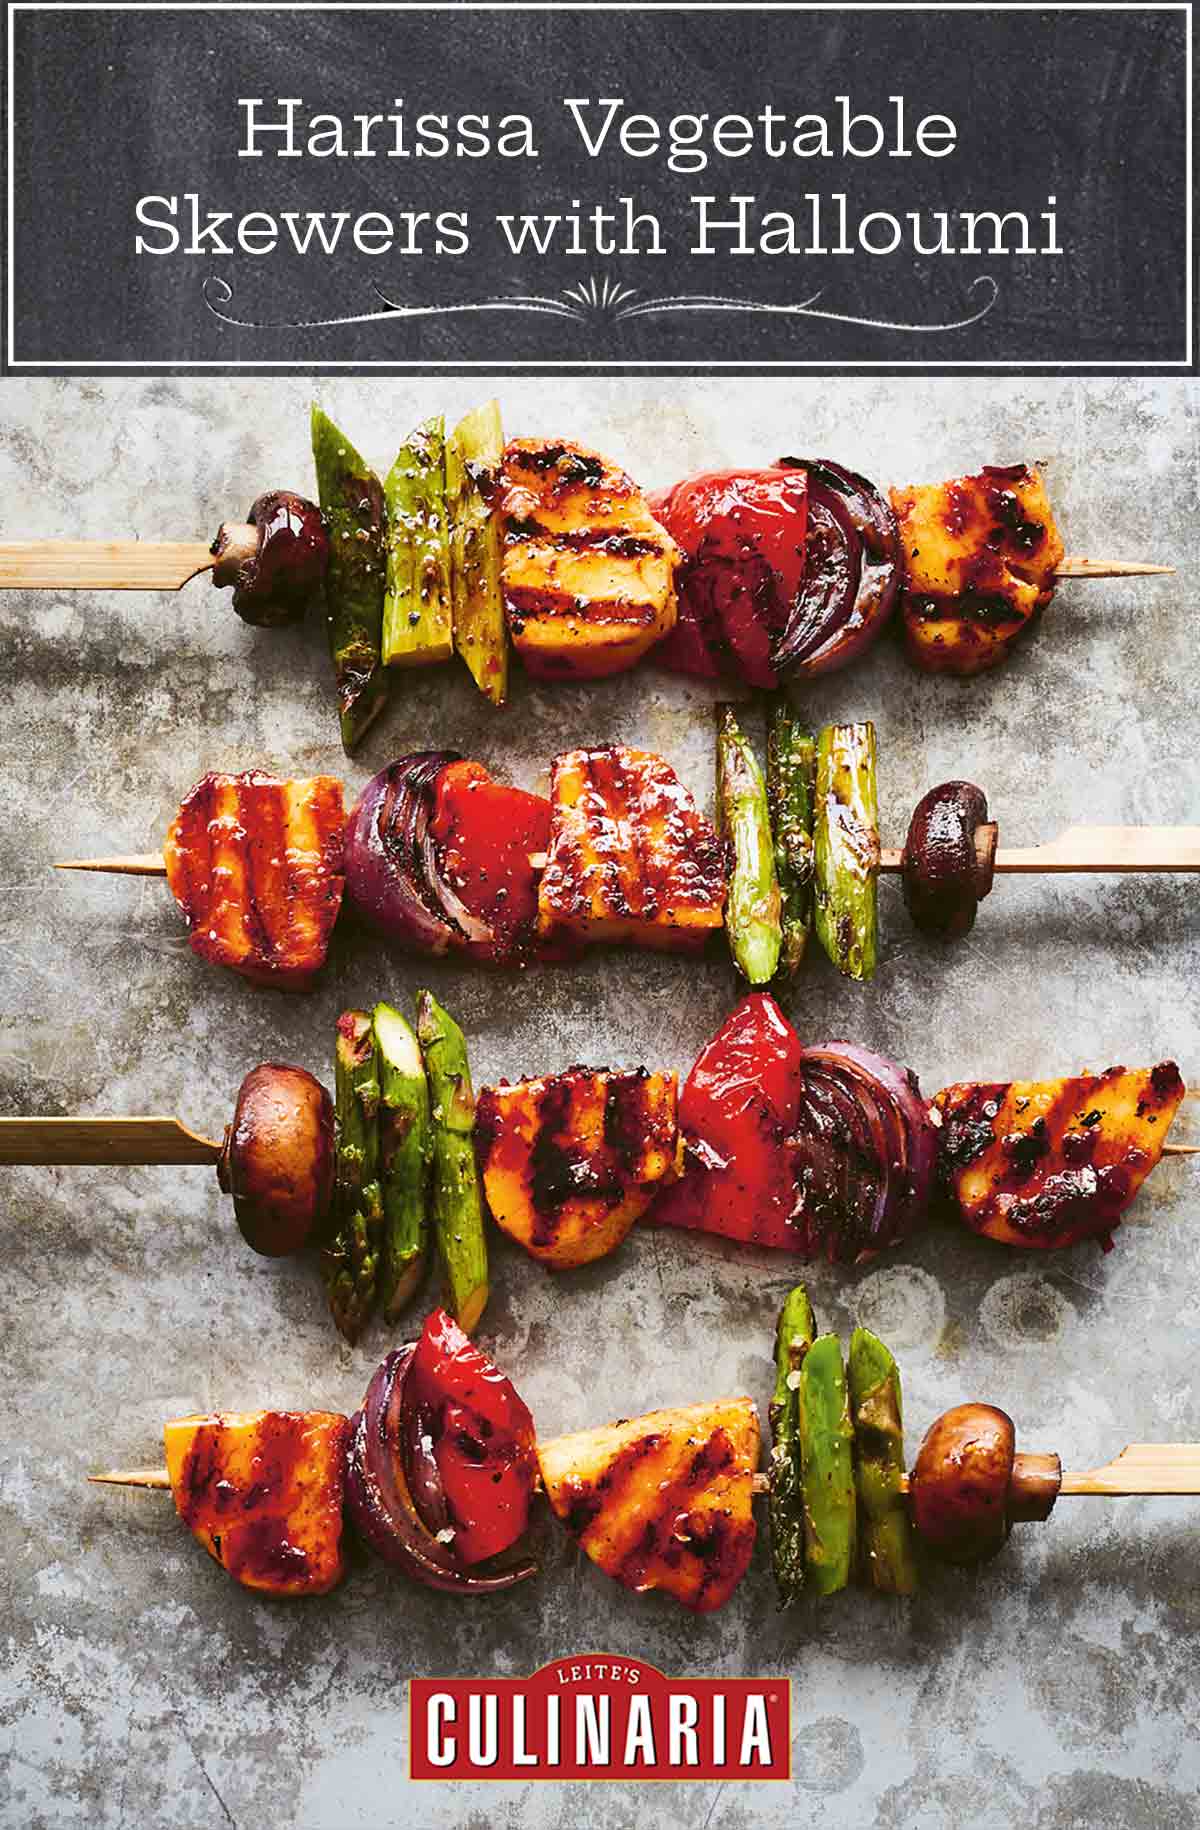 Four grilled vegetable skewers with harissa-marinated halloumi.